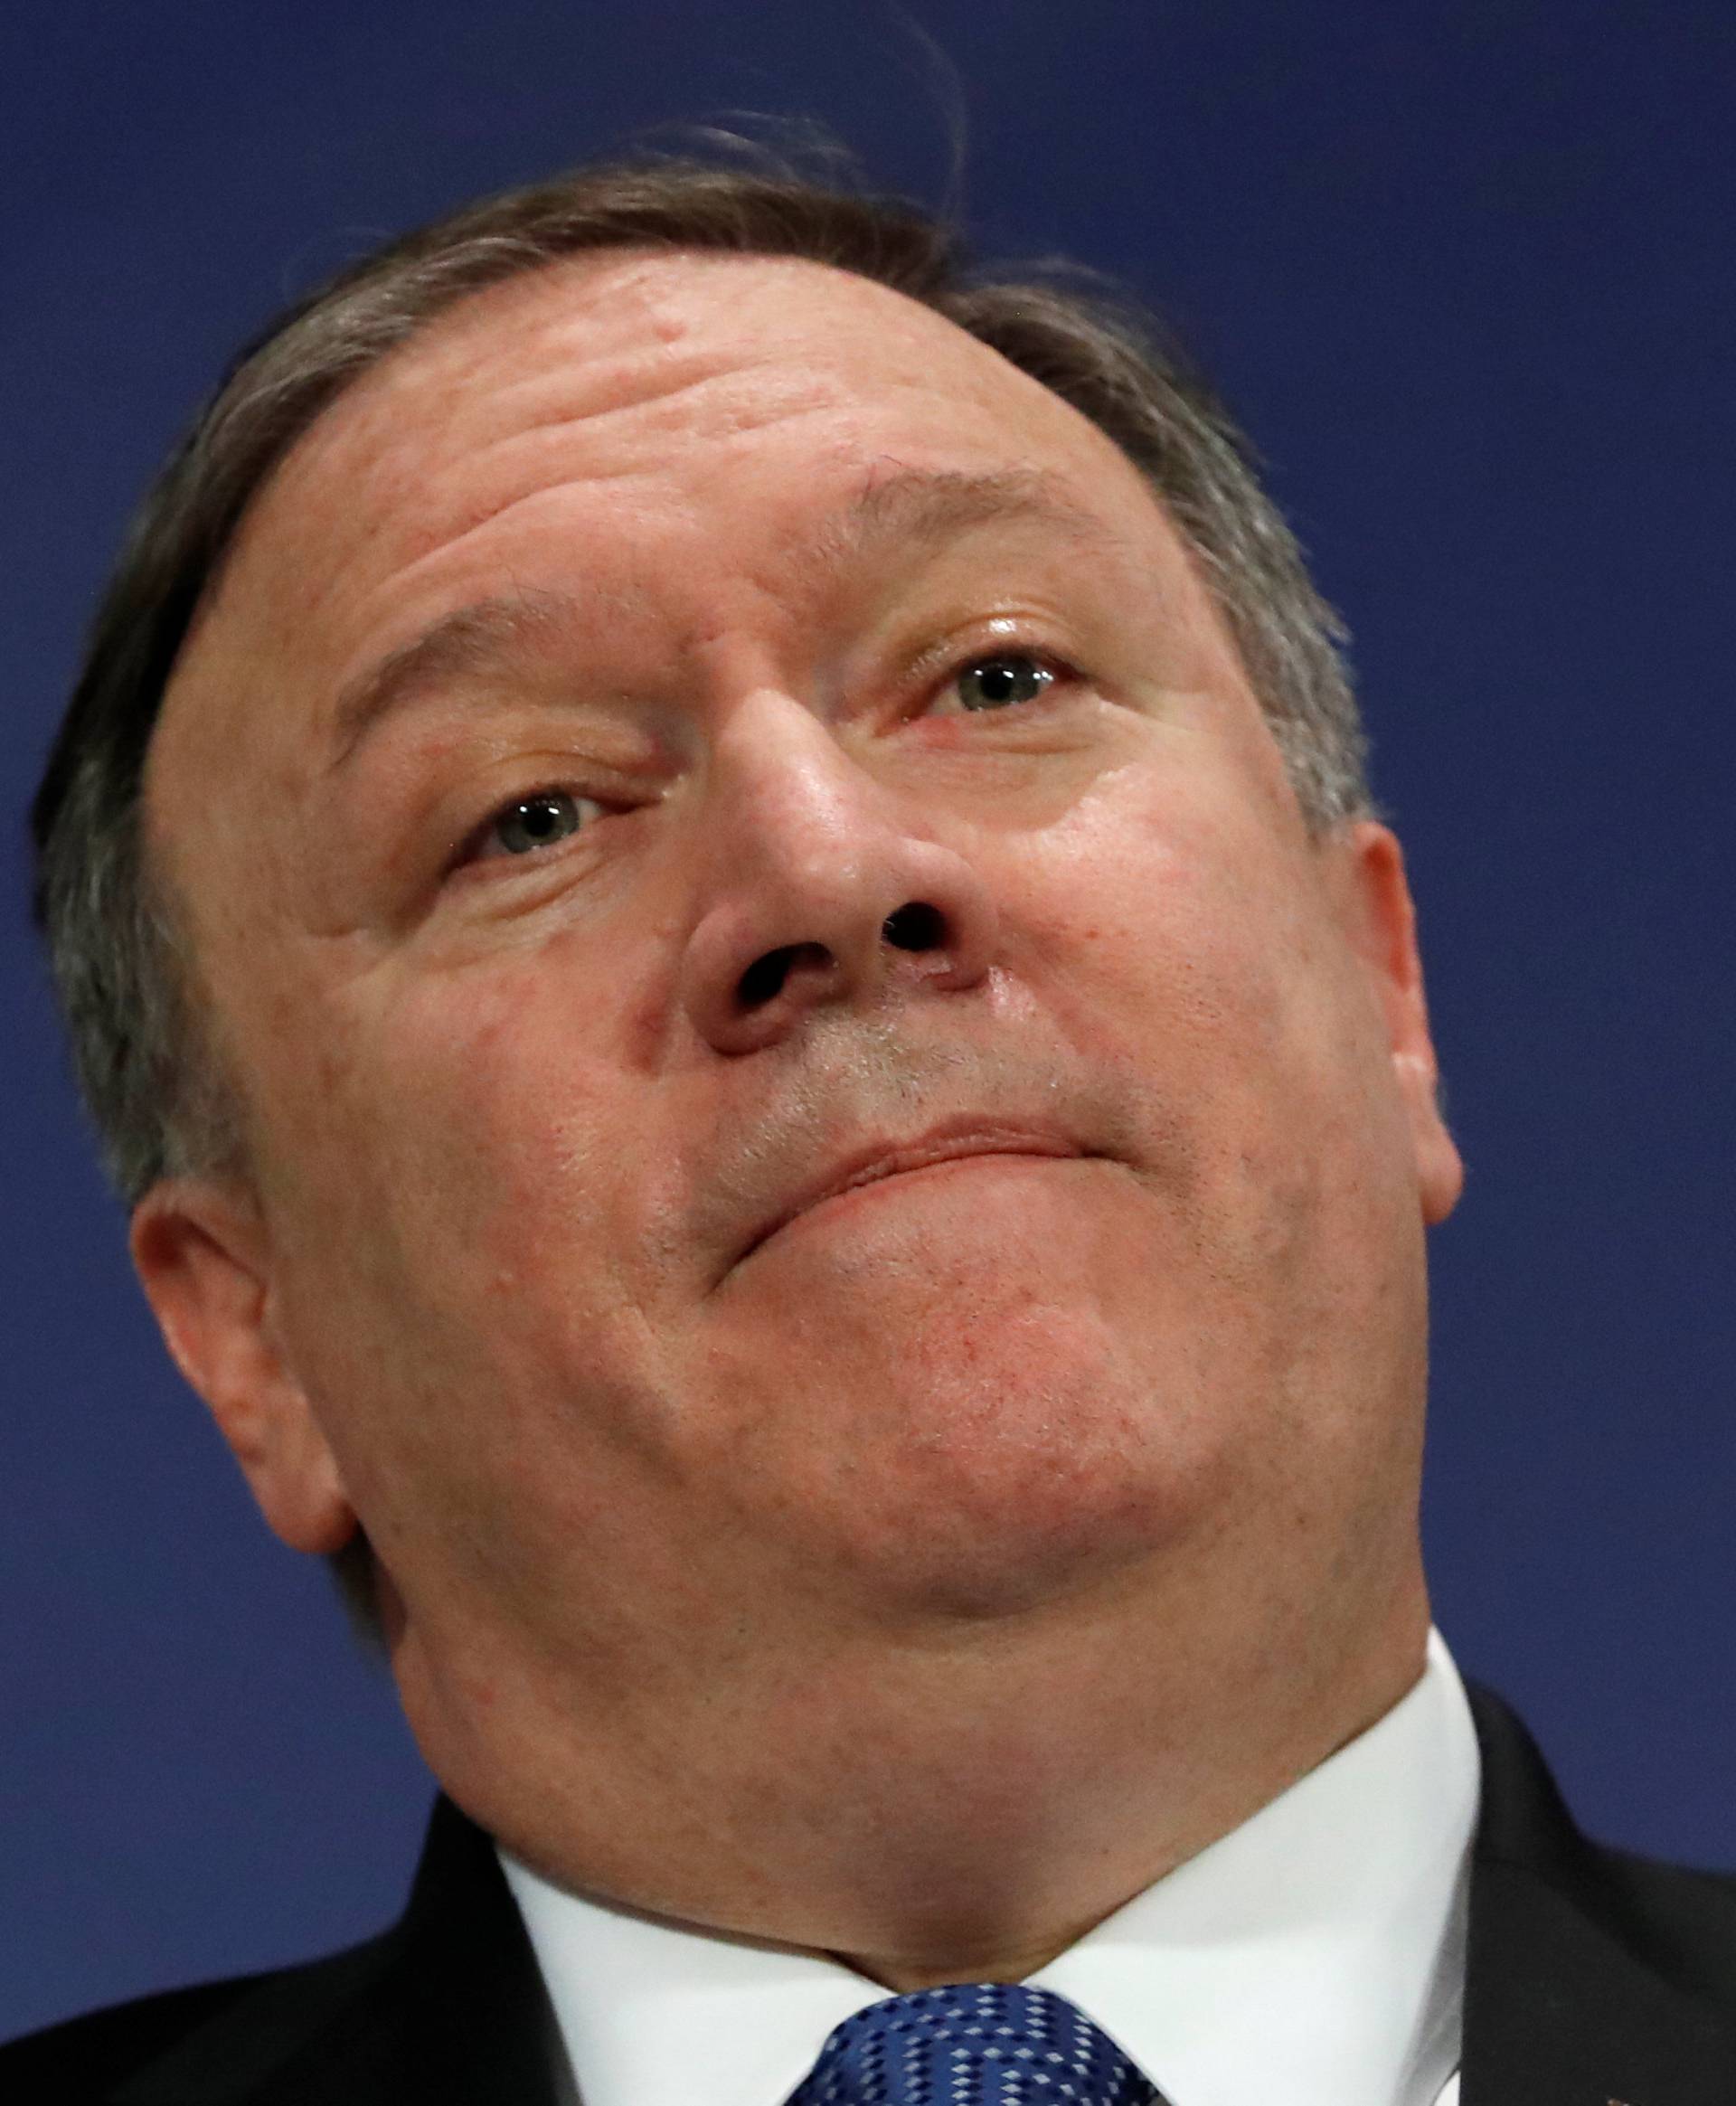 U.S. Secretary of State Mike Pompeo attends a news conference at the Allianceâs headquarters, in Brussels